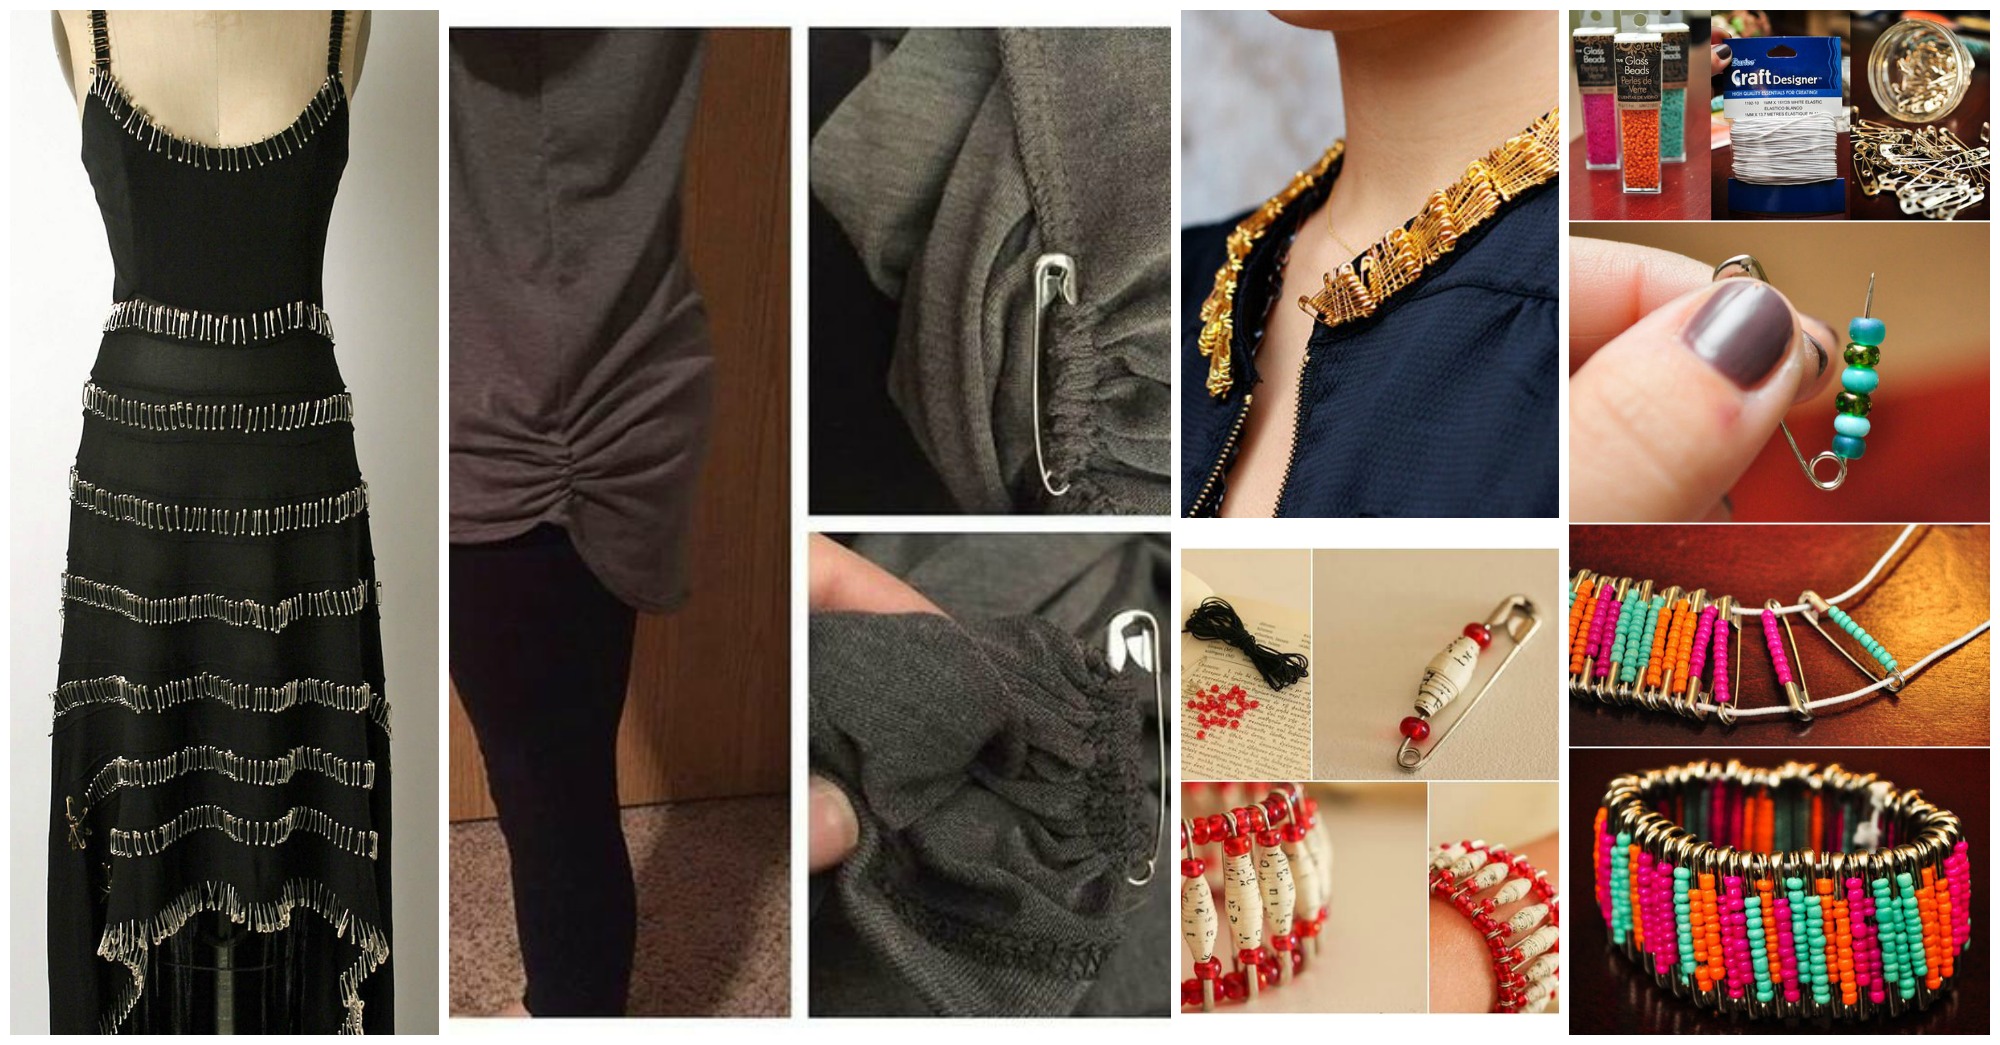 16 Creative DIY Fashion Projects to Make with Safety Pins